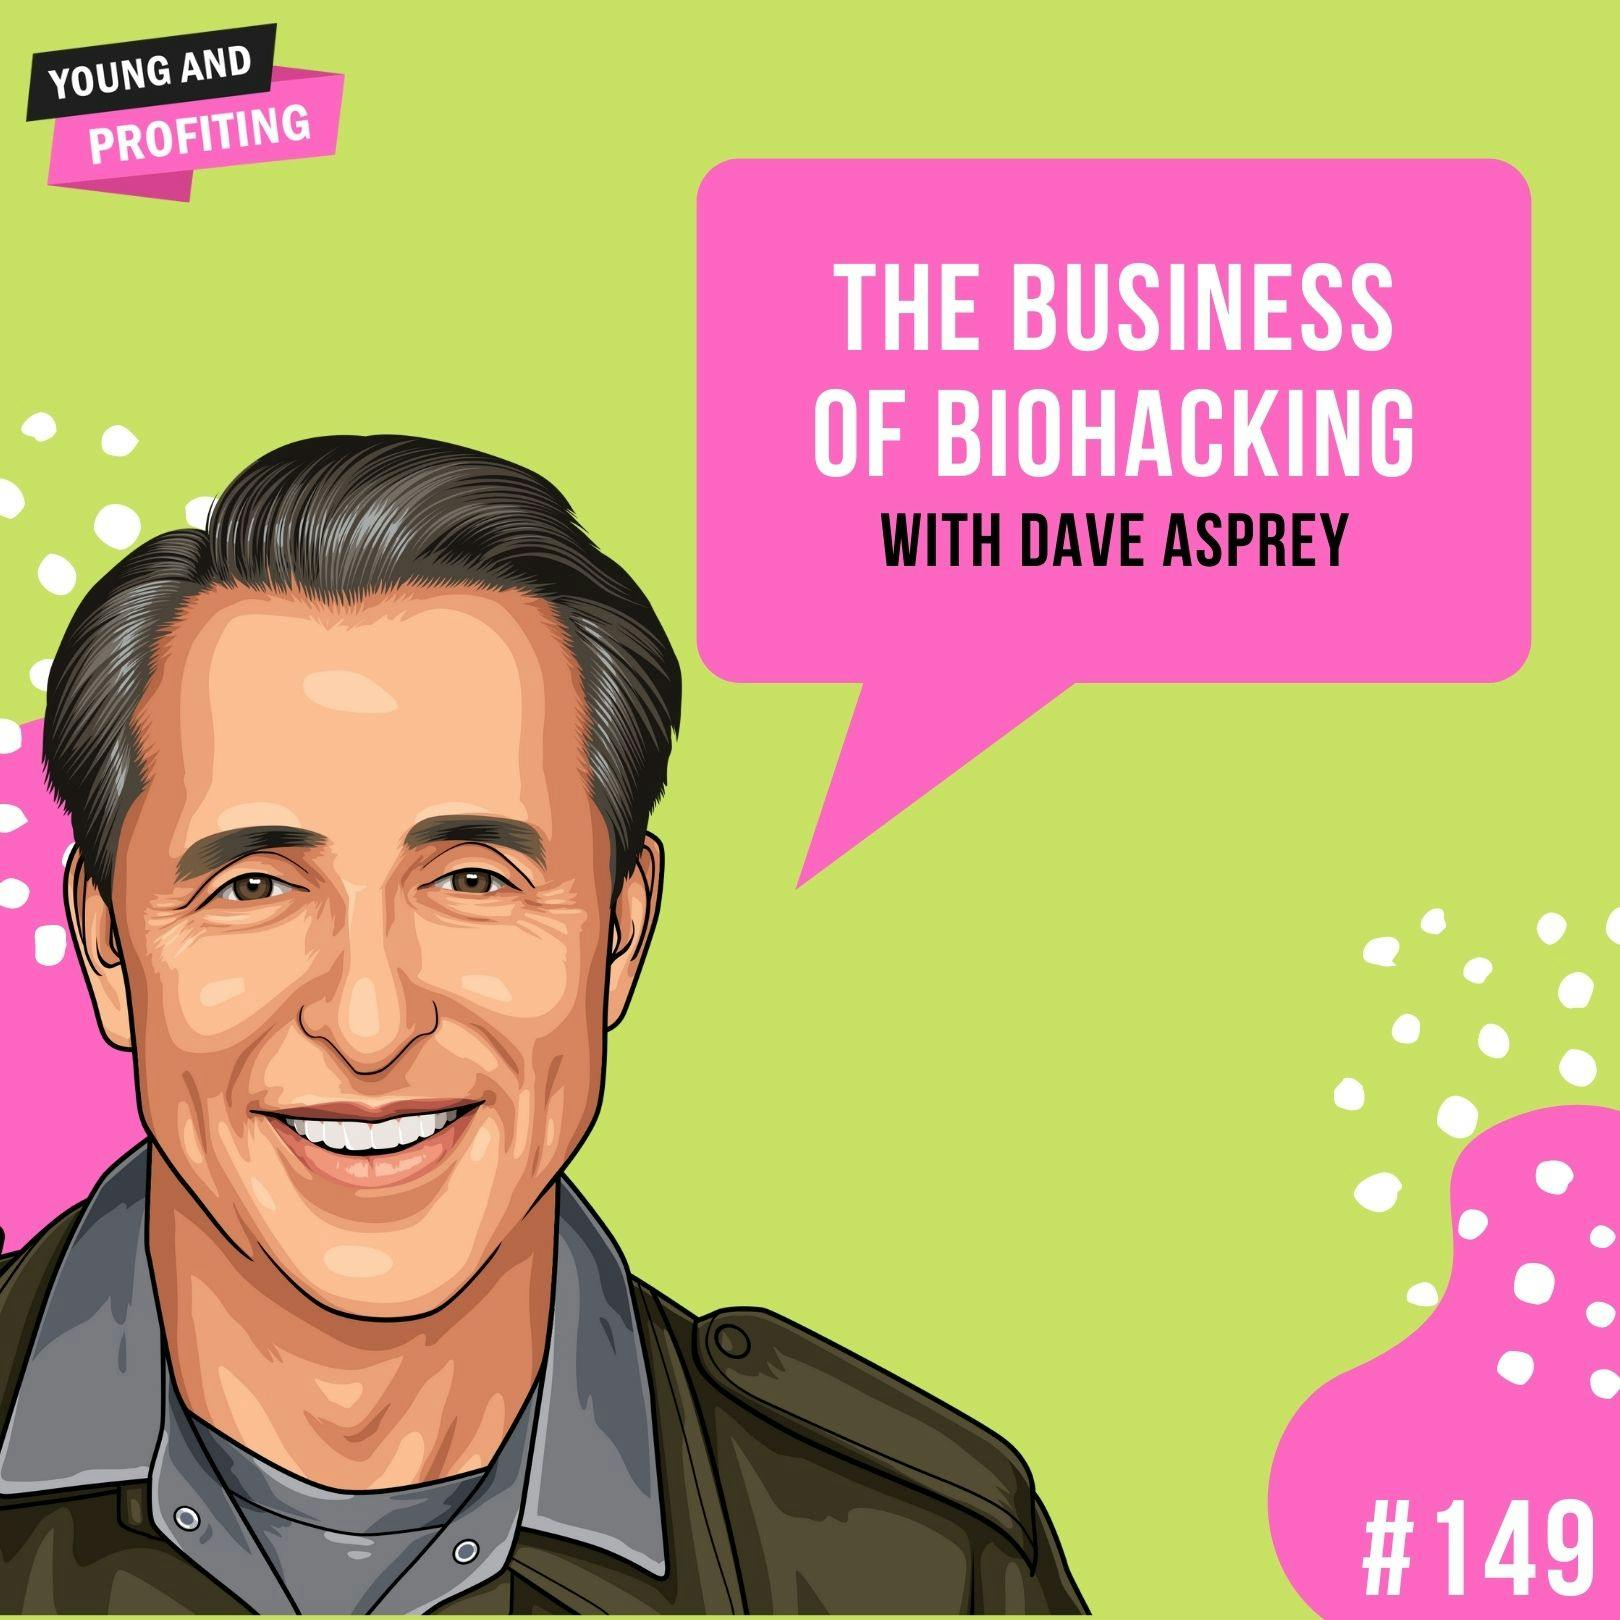 #149: The Business of Biohacking with Dave Asprey